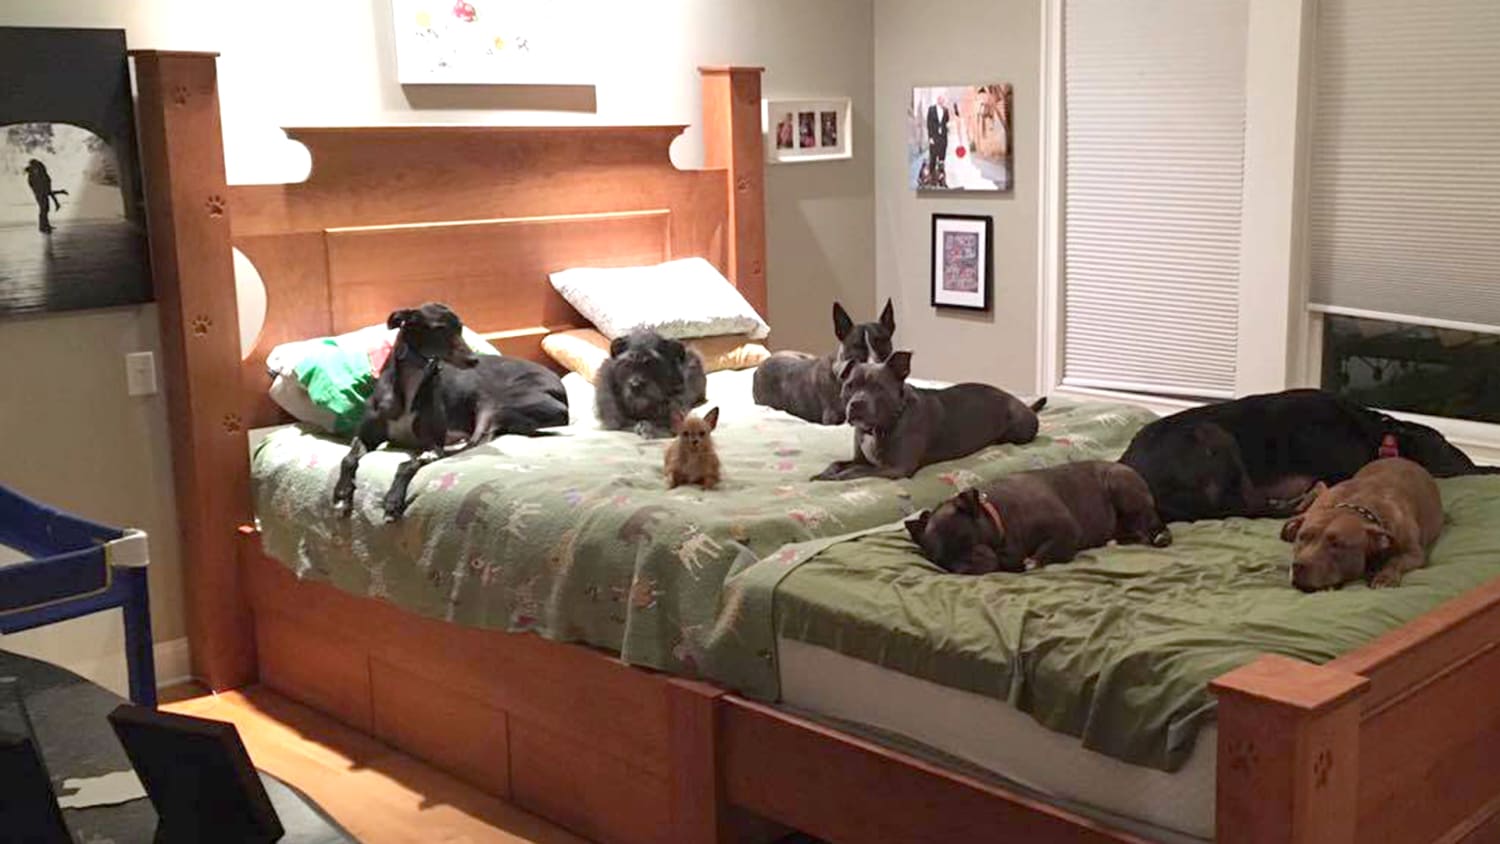 Giant Bed To Sleep Comfortably With 8 Dogs, Extended King Size Bed